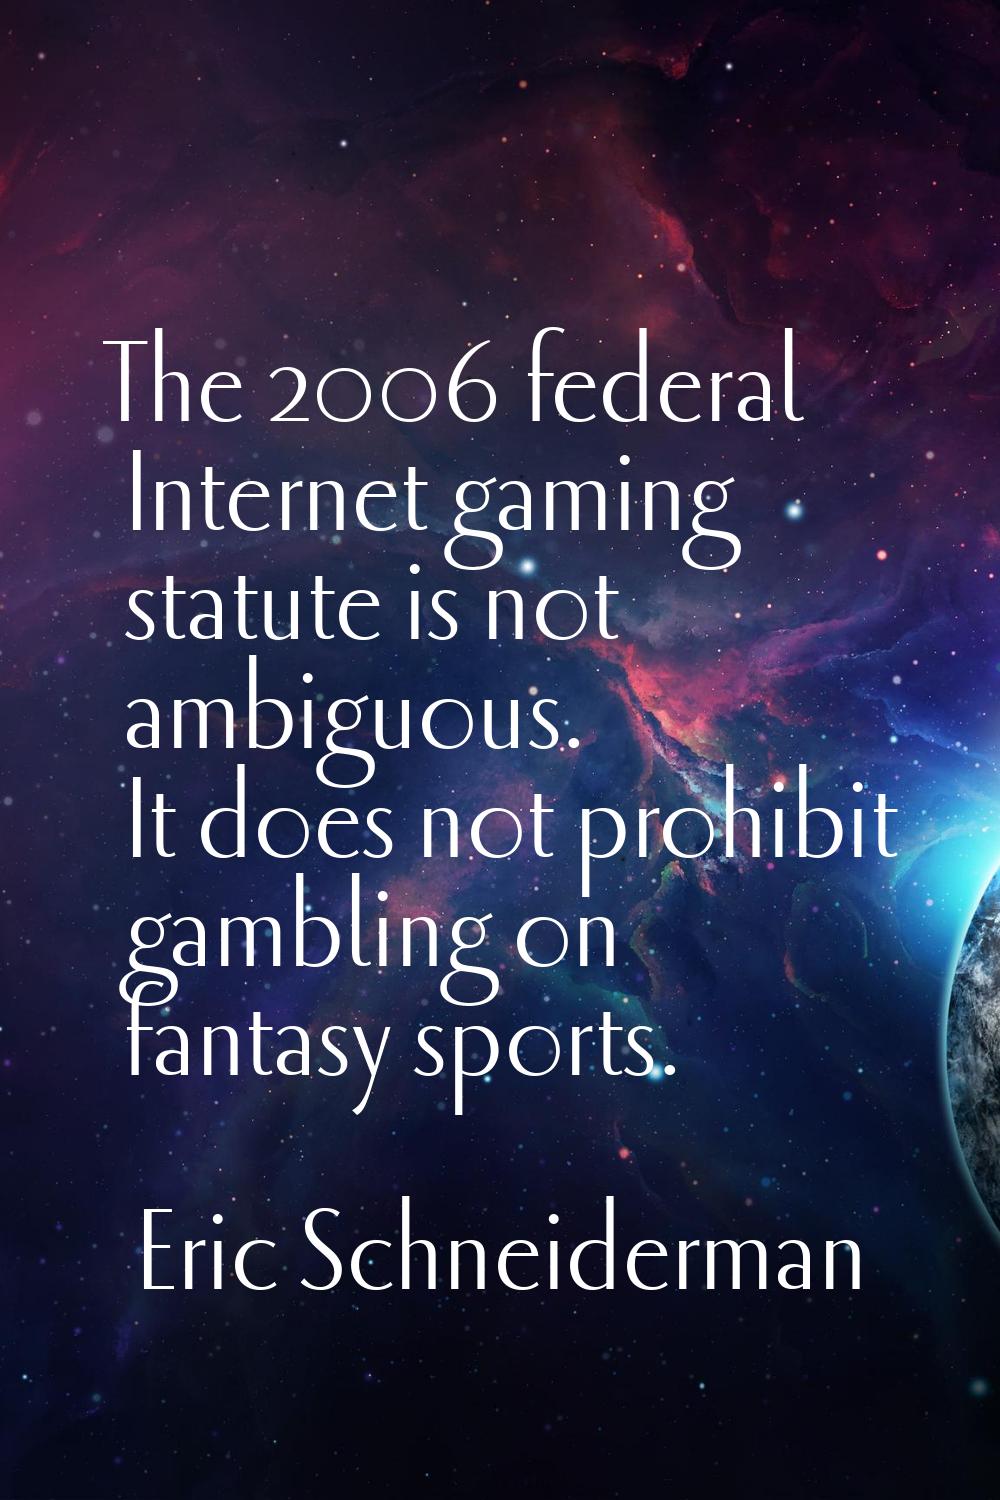 The 2006 federal Internet gaming statute is not ambiguous. It does not prohibit gambling on fantasy